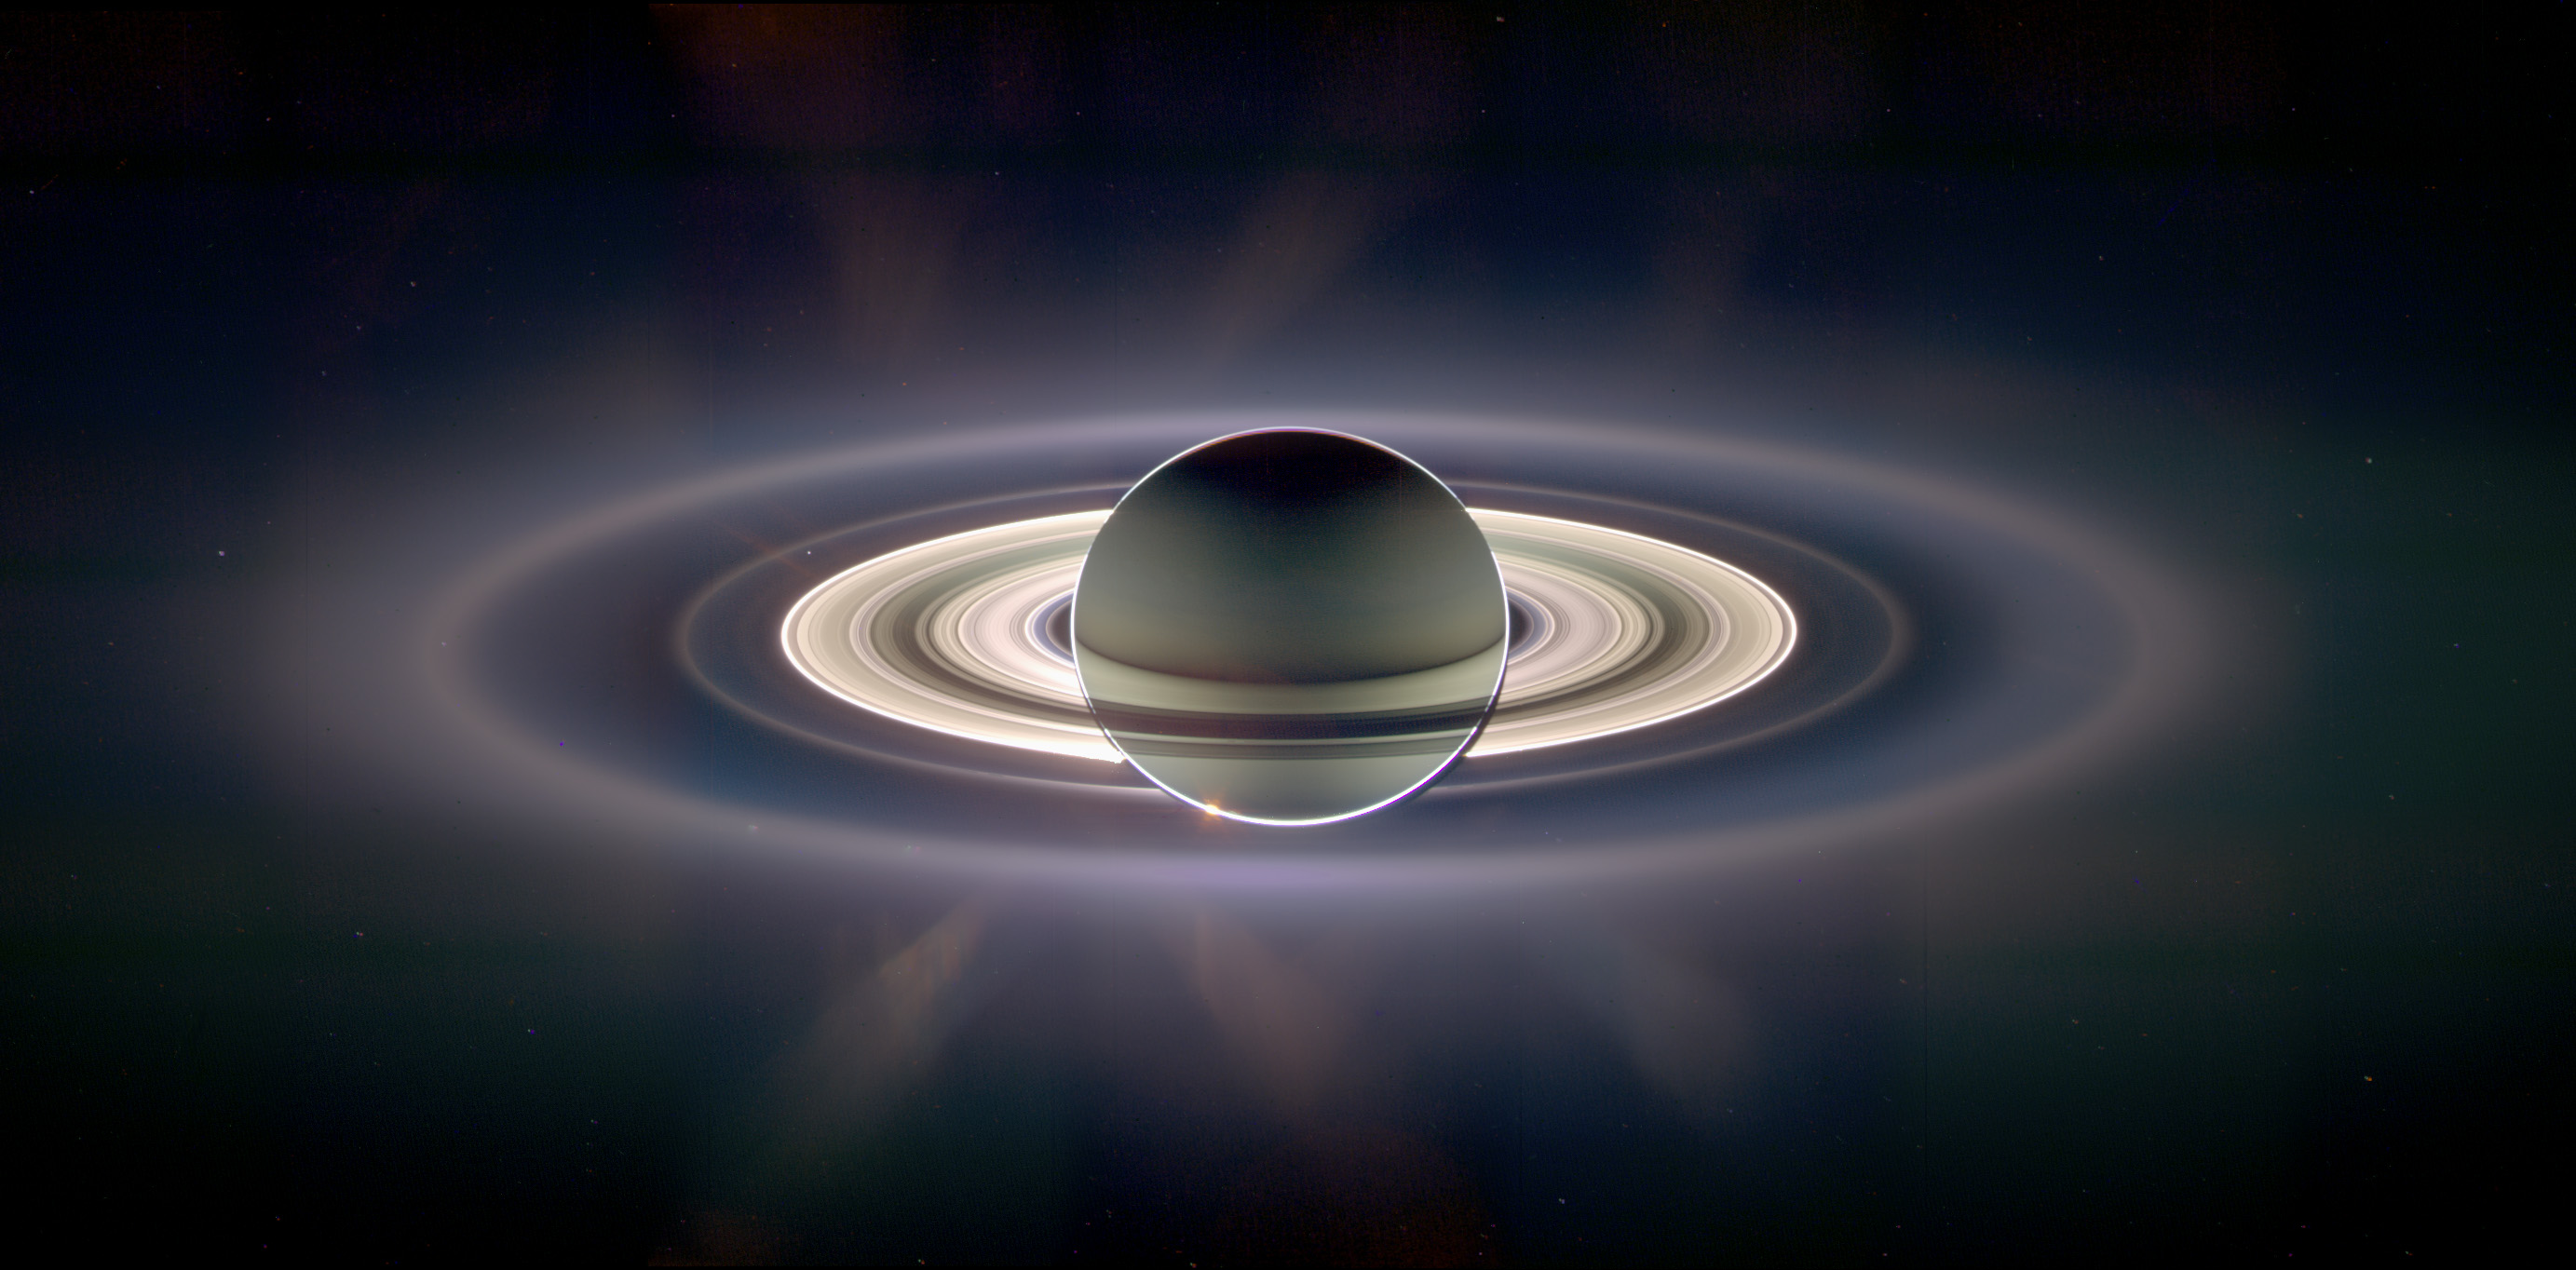 Surprise! The Earth is visible in this image of Saturn during a total eclipse, taken by the Cassini spacecraft. Today, it will take another image.